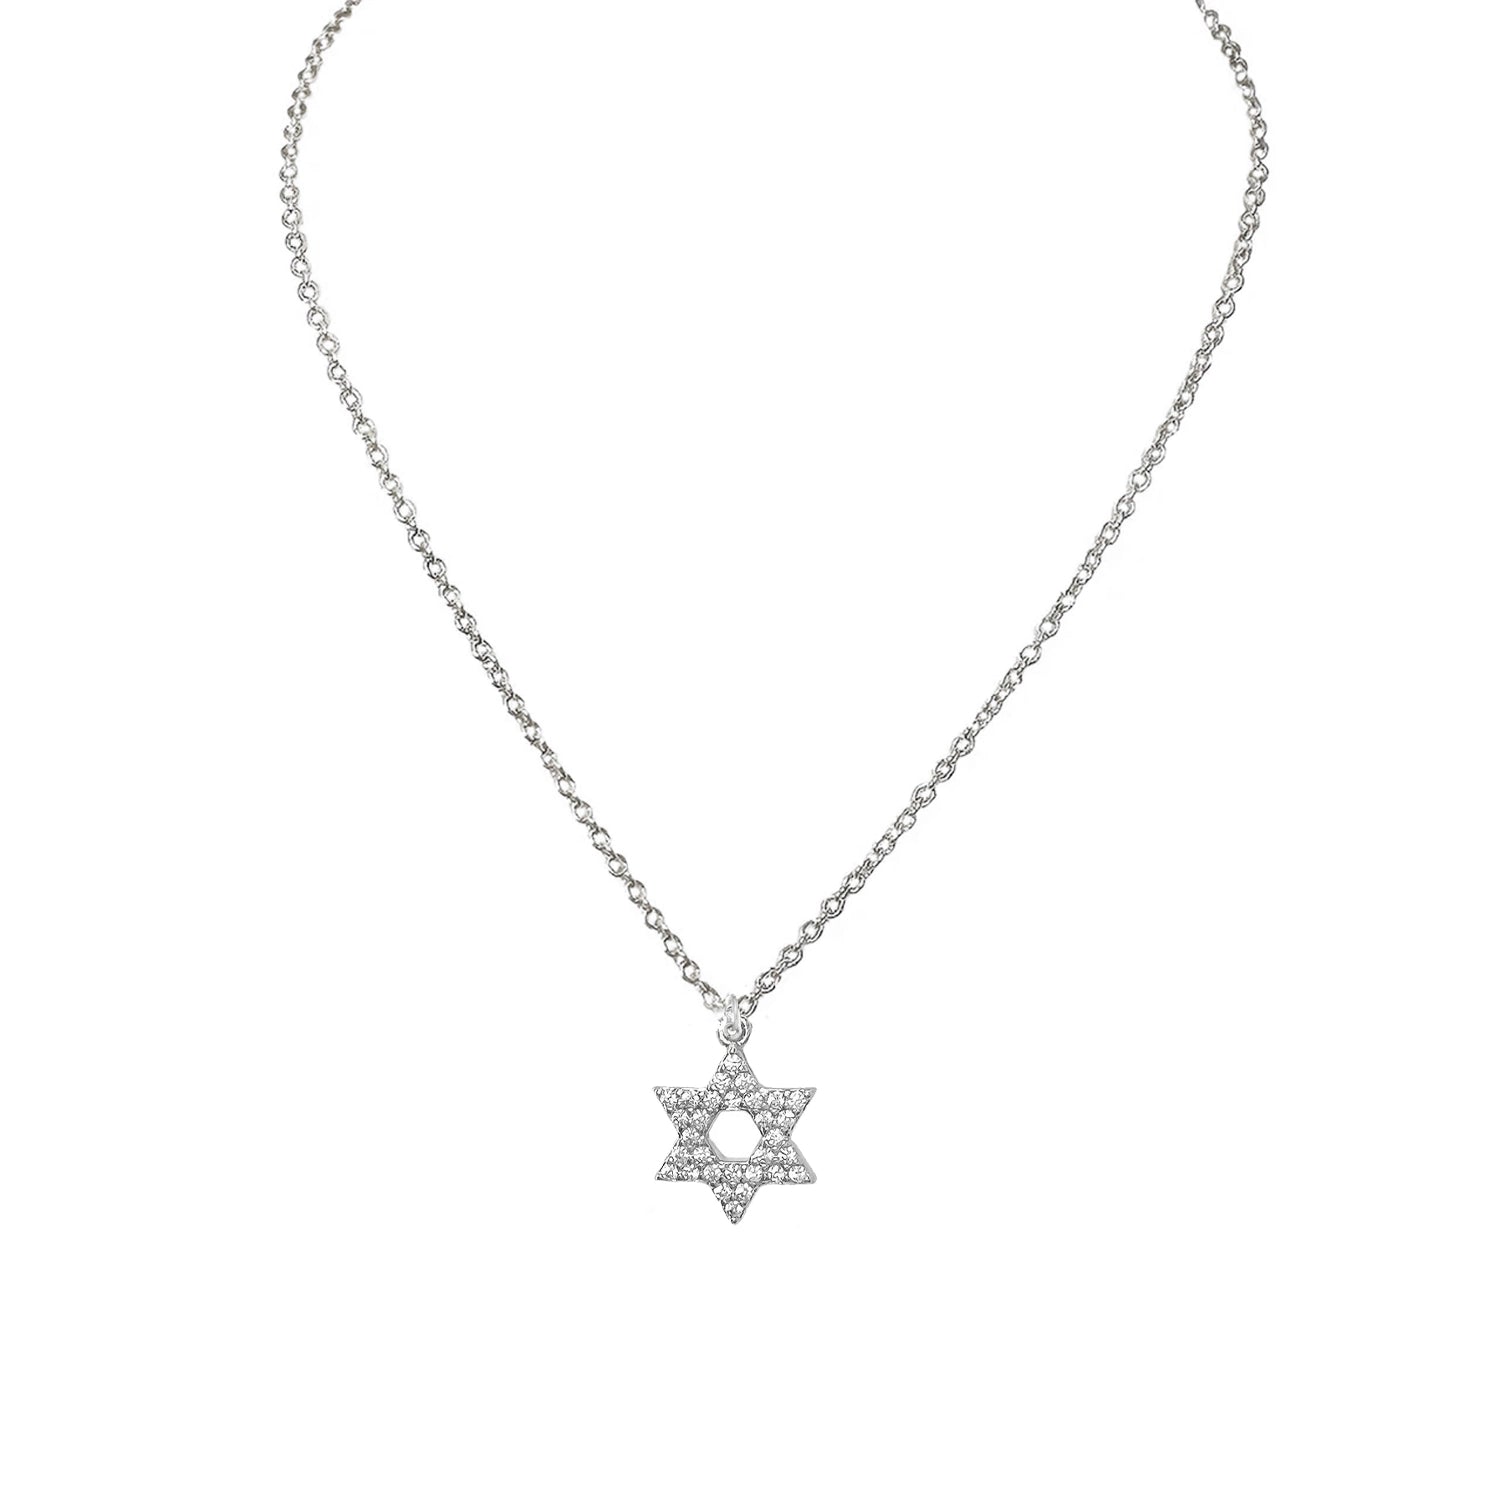 Silver Star of David necklace